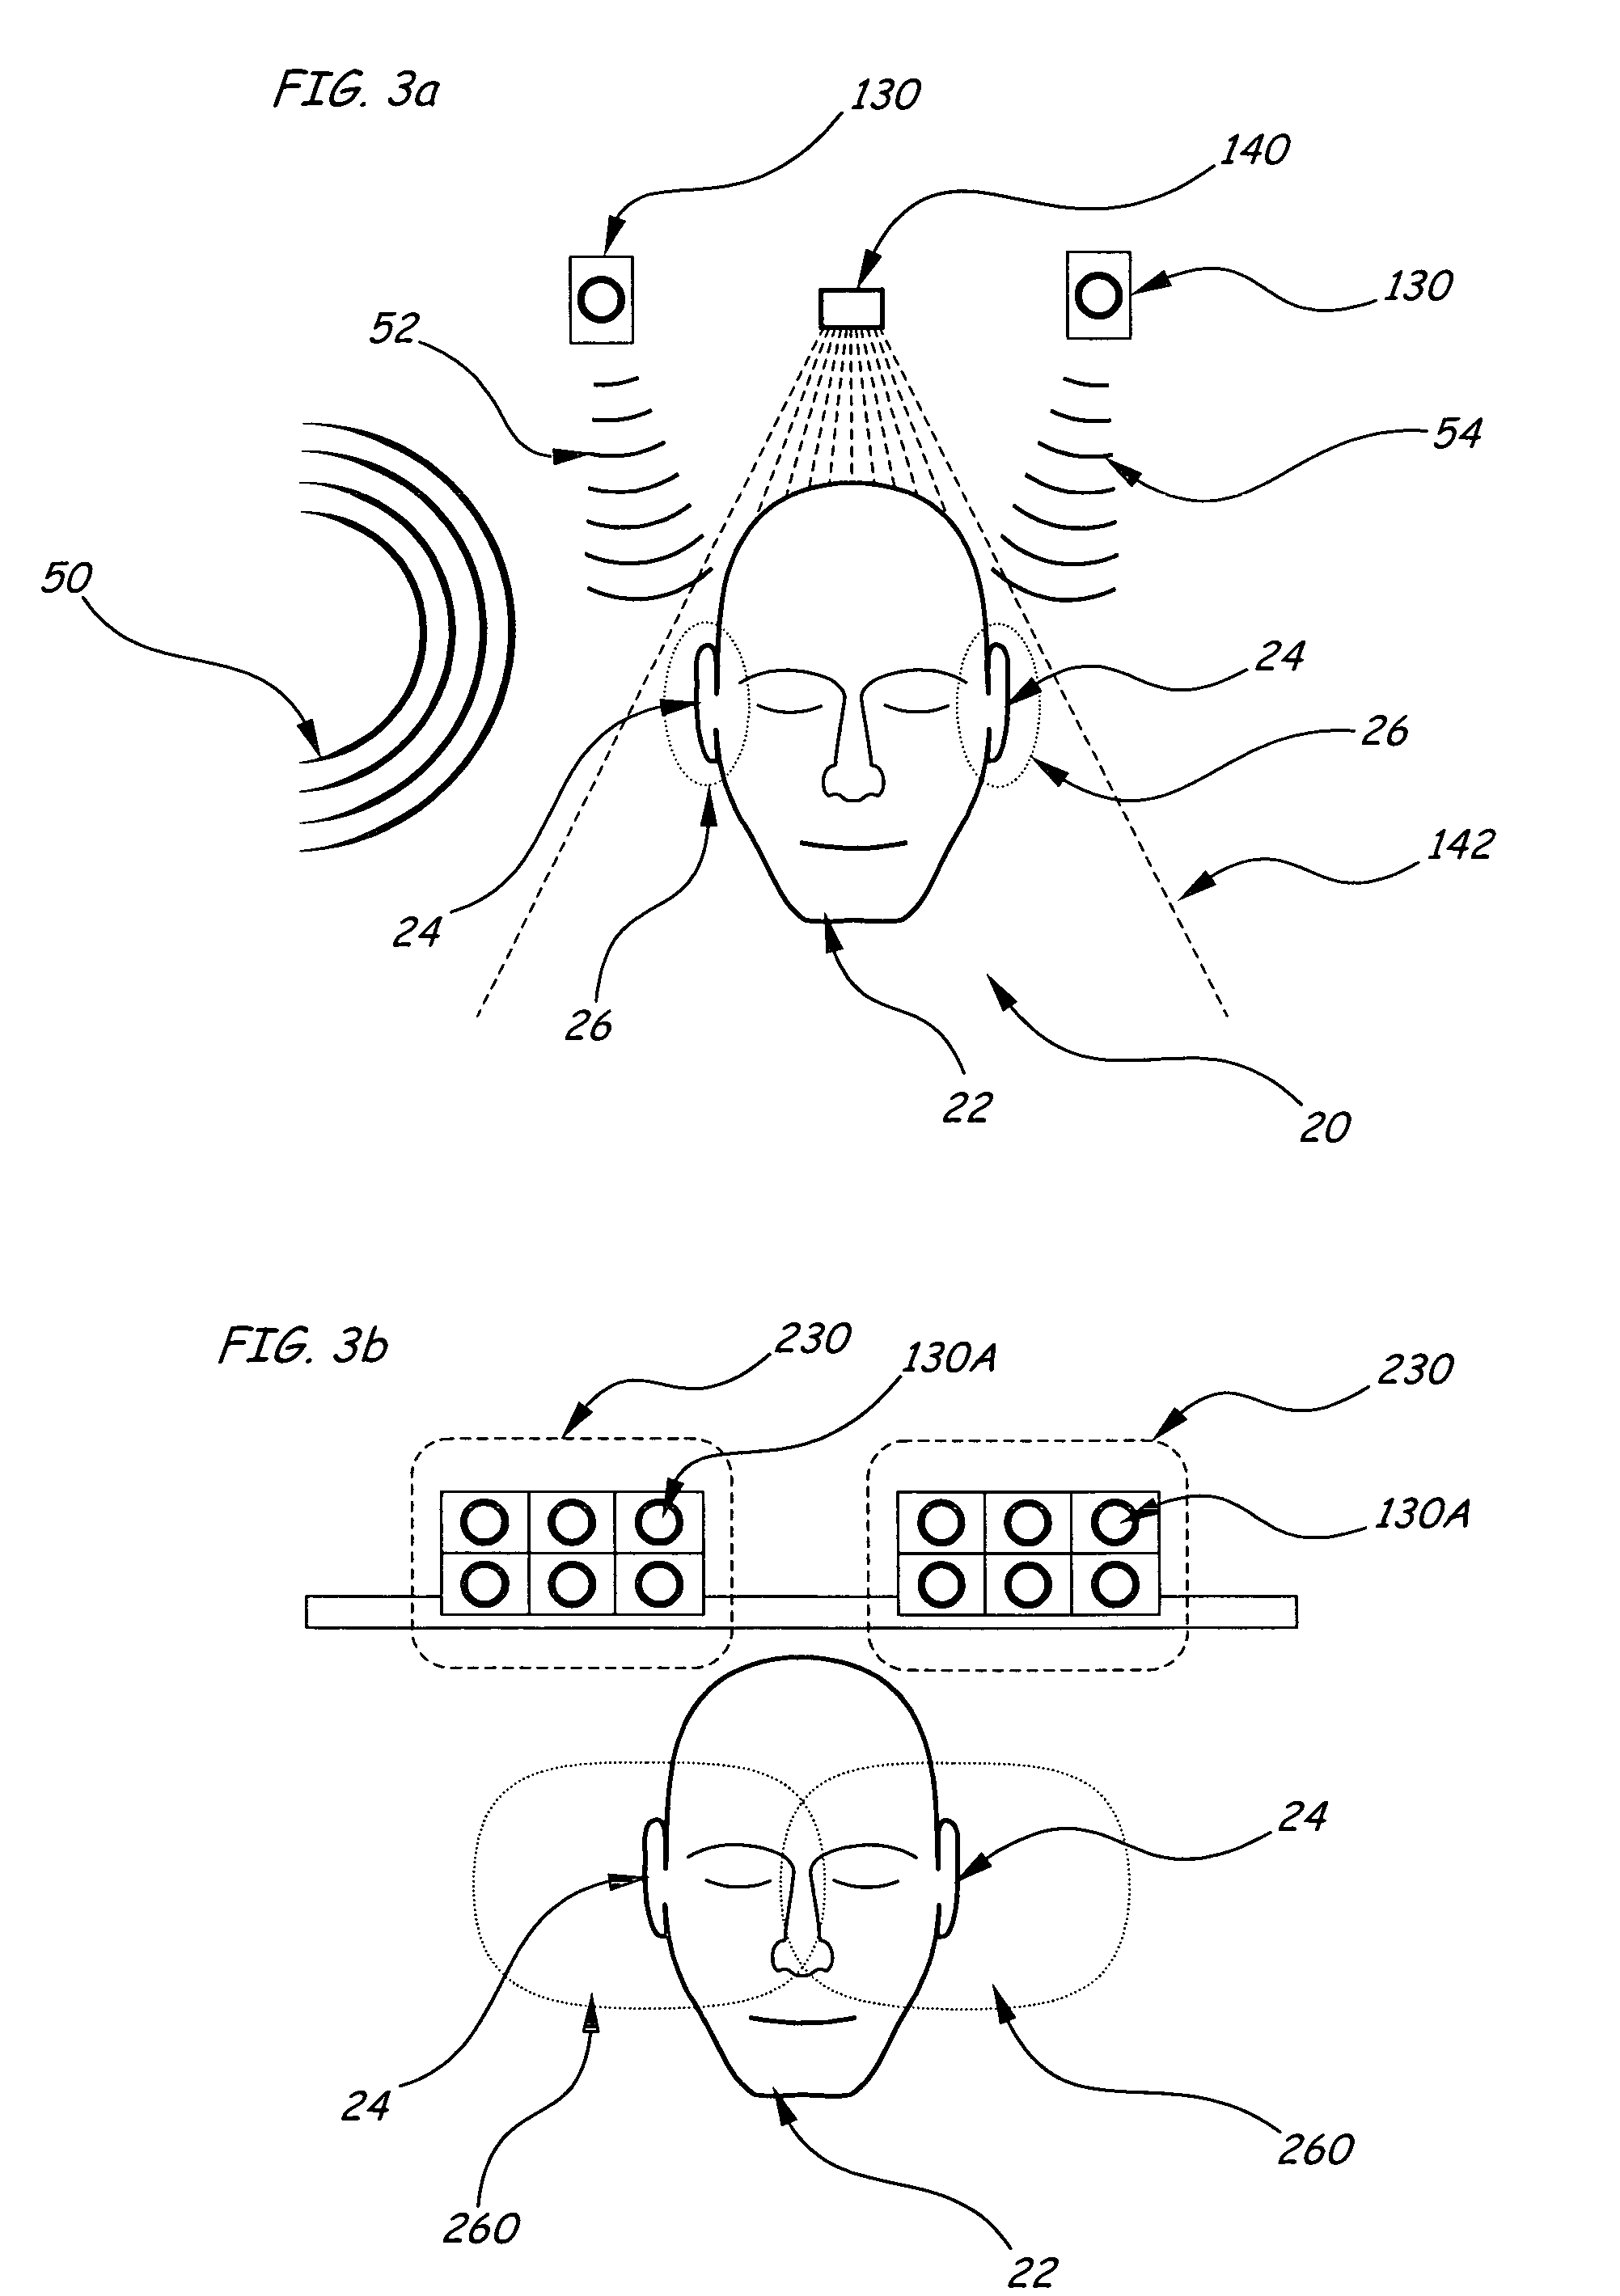 Sound canceling systems and methods